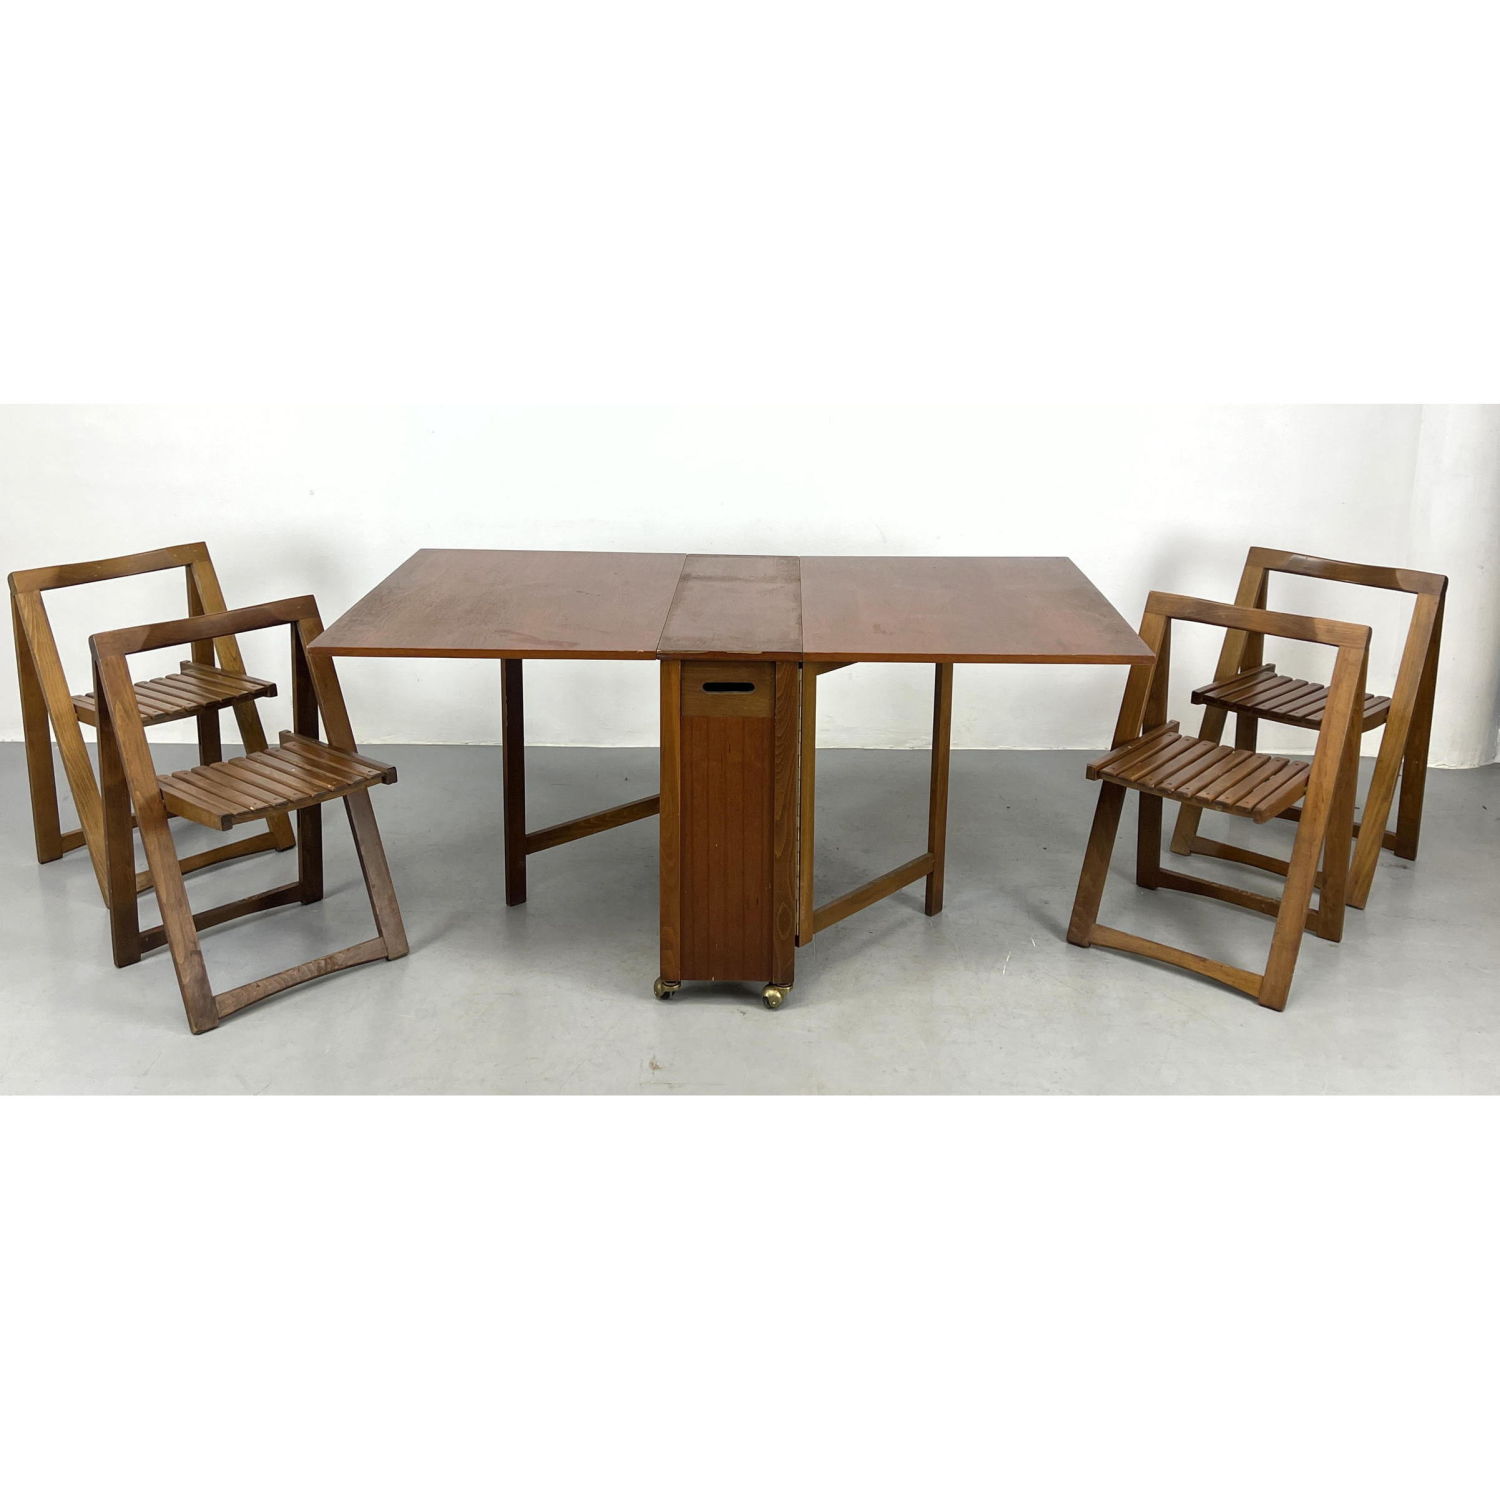 Romanian Space Saver Dining Table 2ff30e